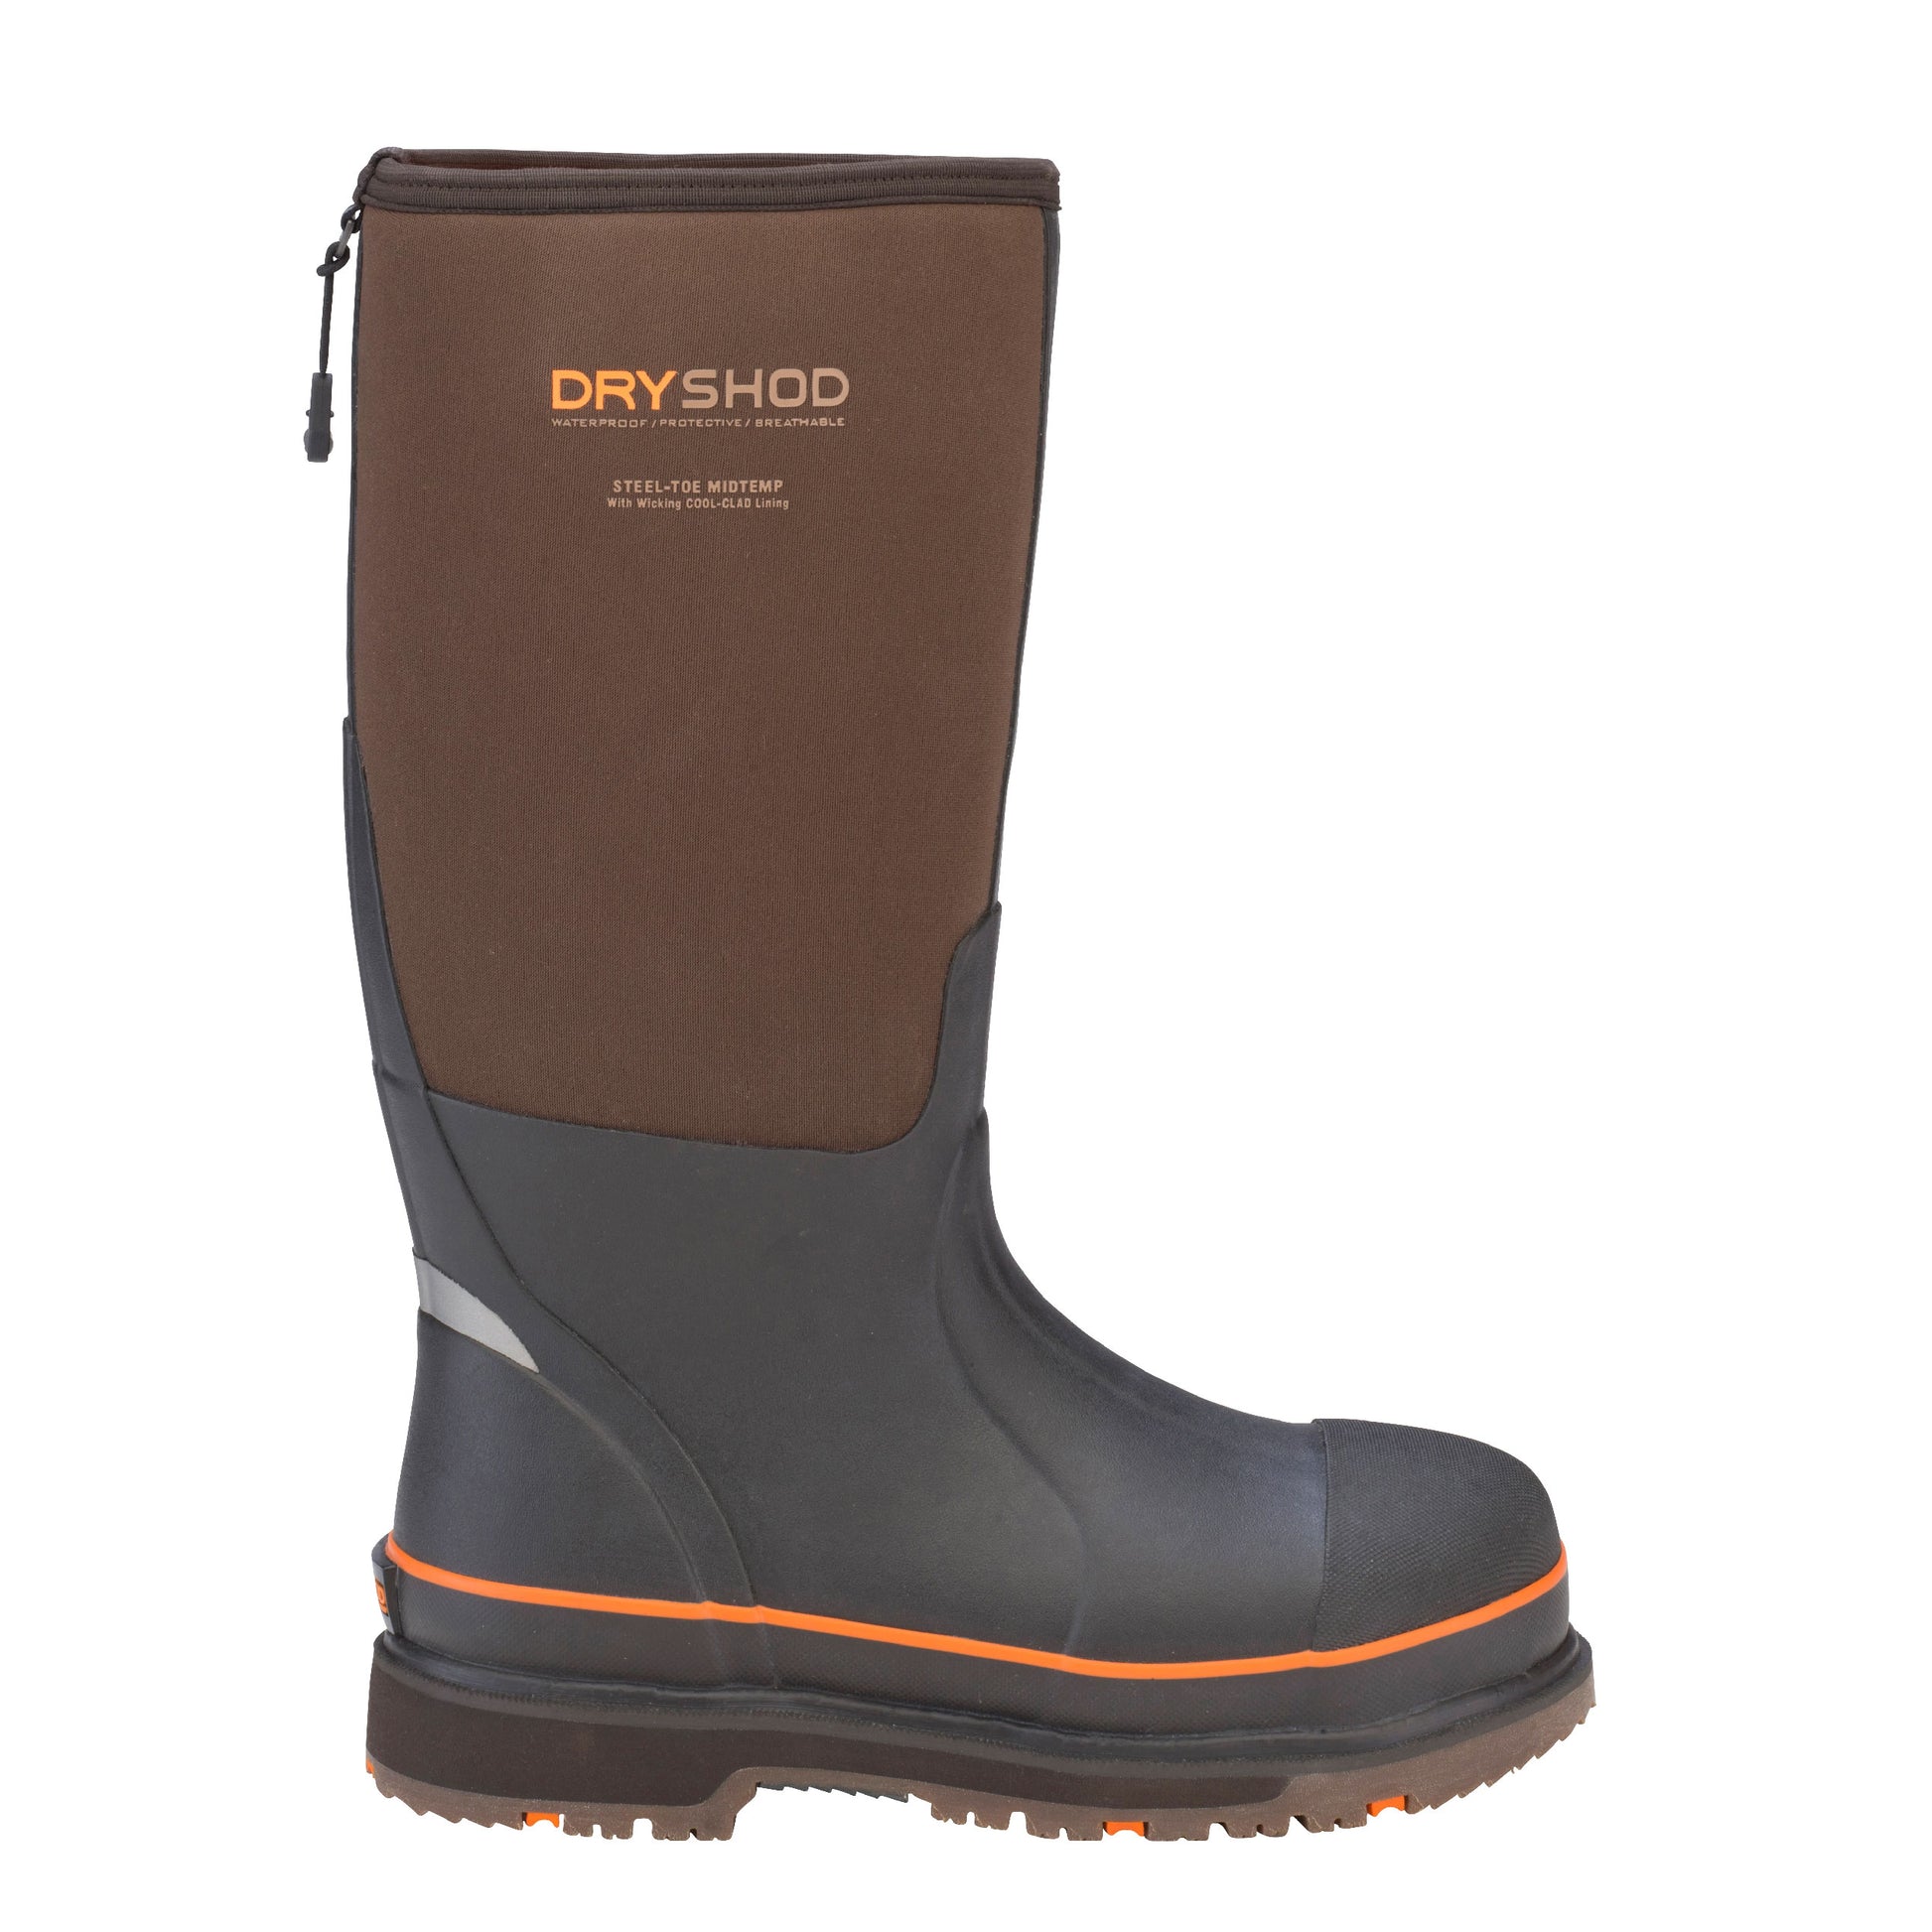 DRYSHOD STEEL TOE WIXIT COOL-CLAD™ PROTECTIVE WORK BOOT - MEN'S_SIDE